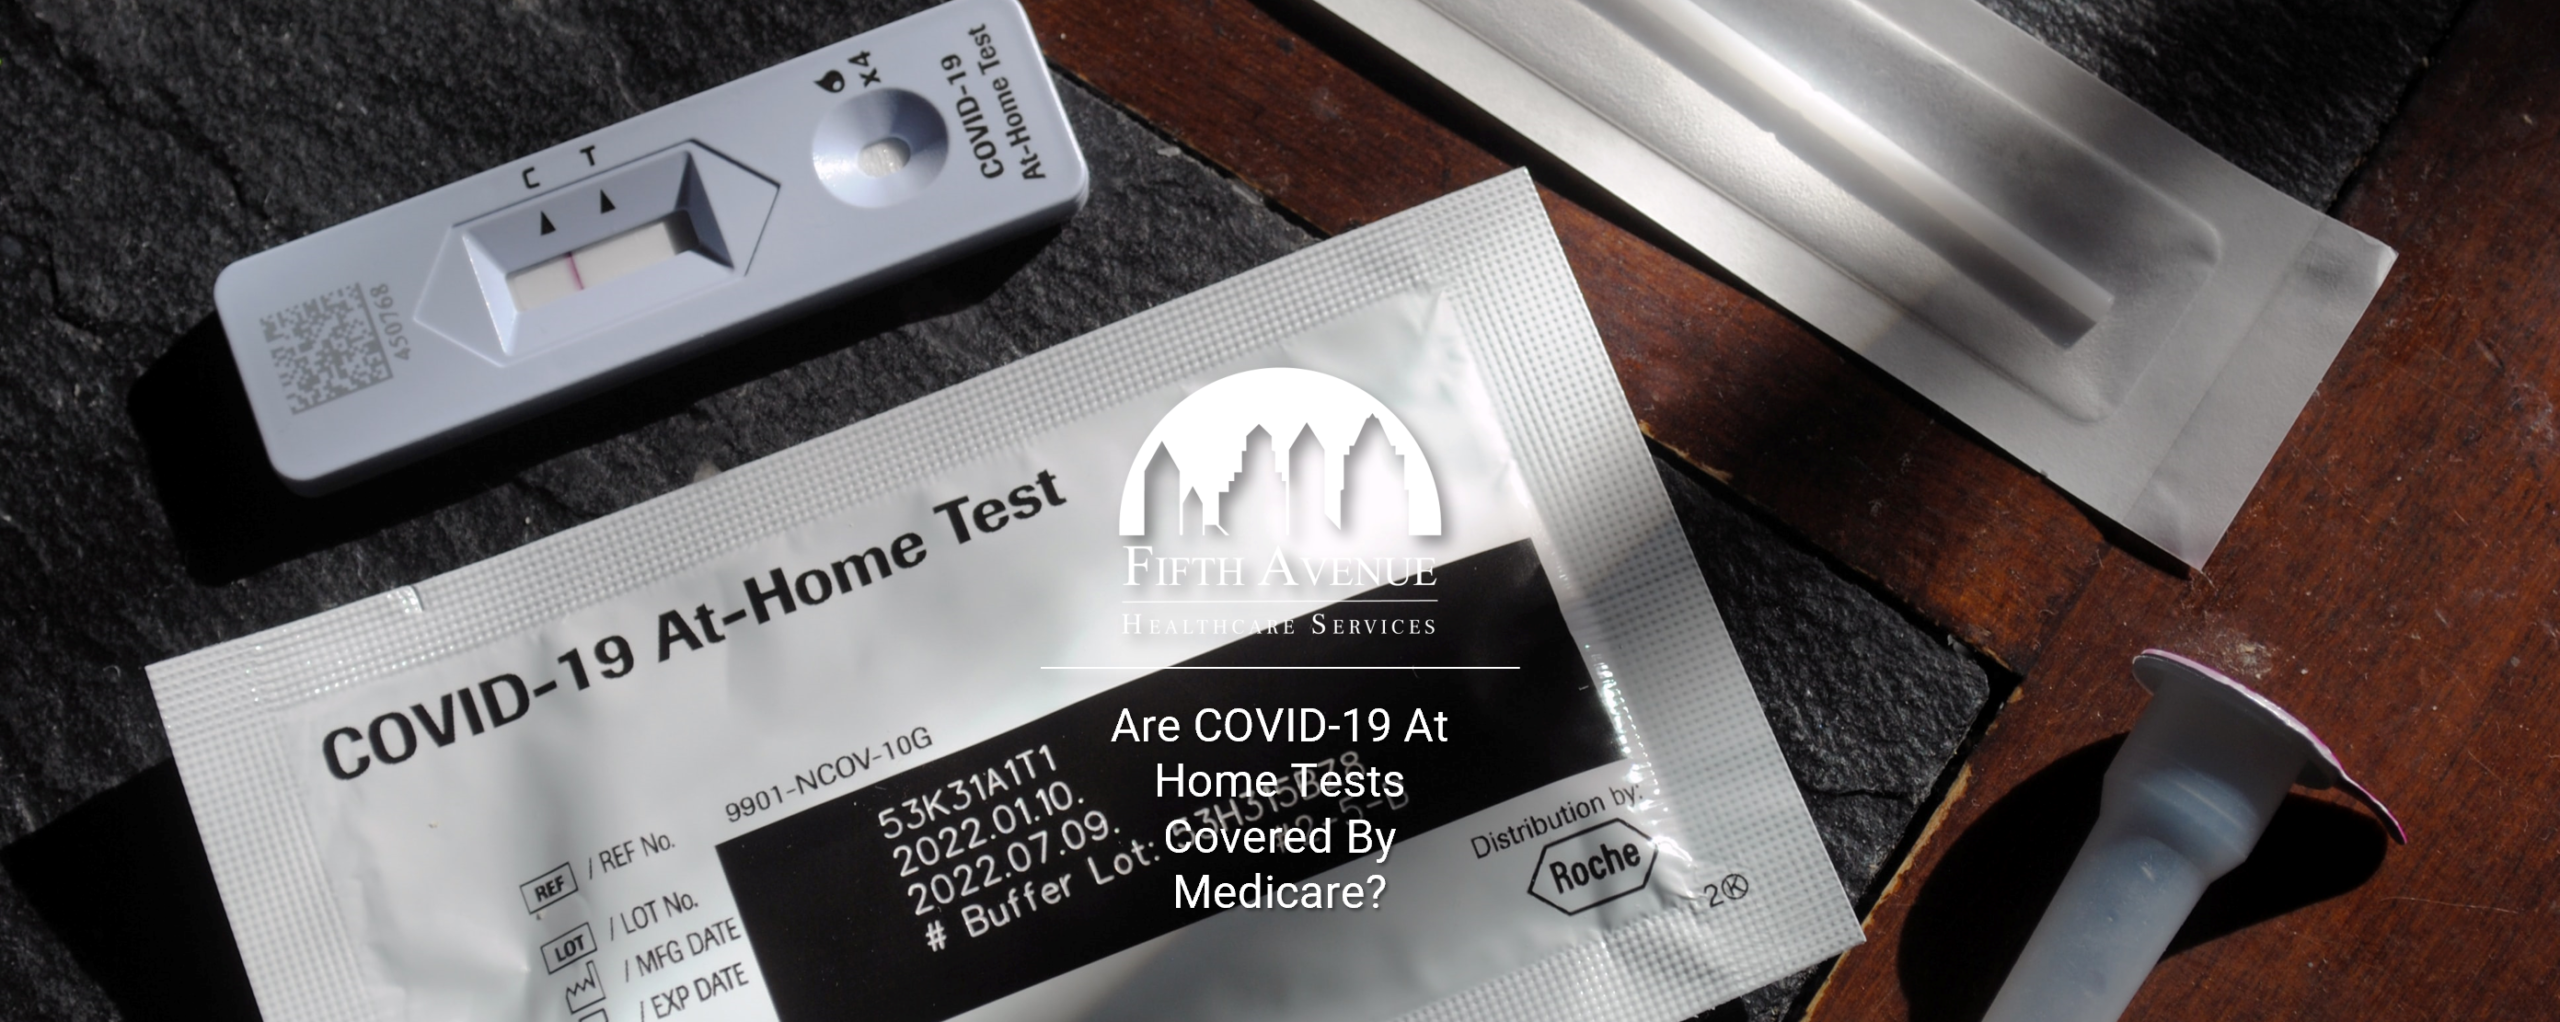 Are COVID-19 At Home Tests Covered By Medicare